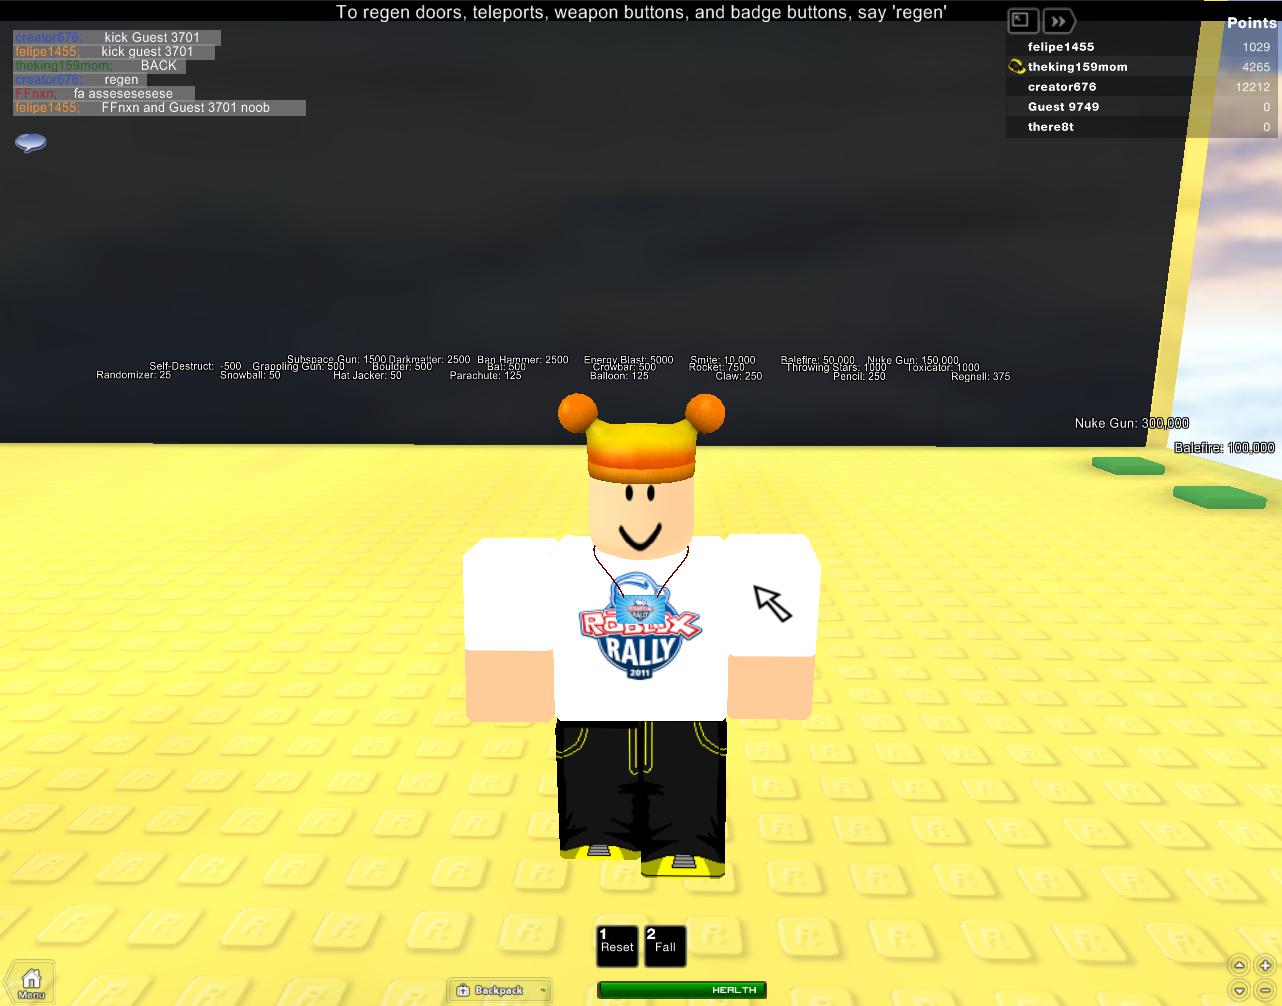 ROBLOX GUESTS ARE BACK?! (roblox is adding guests?) 